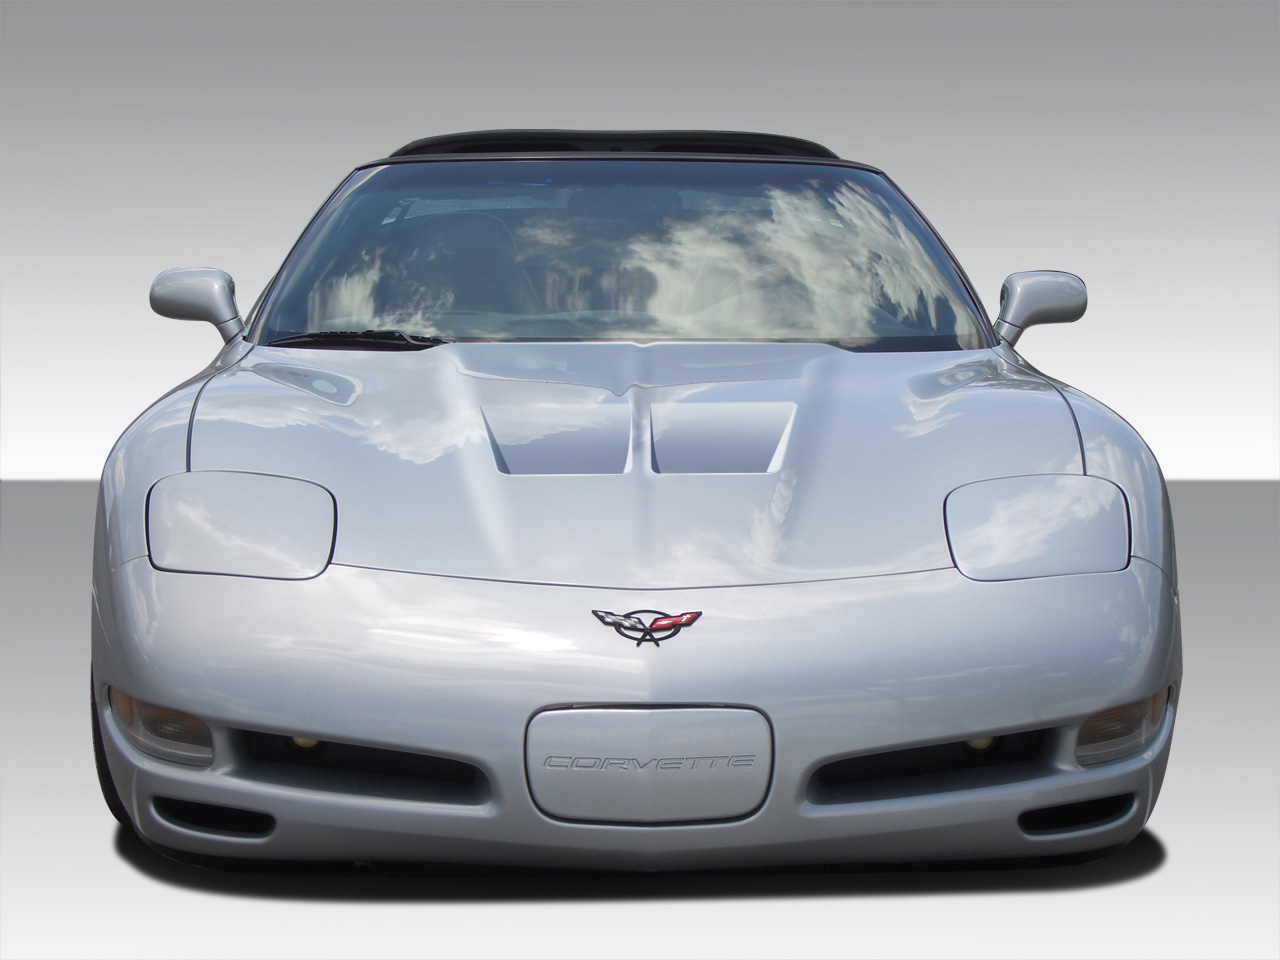 Welcome To Extreme Dimensions Inventory Item 1997 2004 Chevrolet Corvette C5 Duraflex Gt